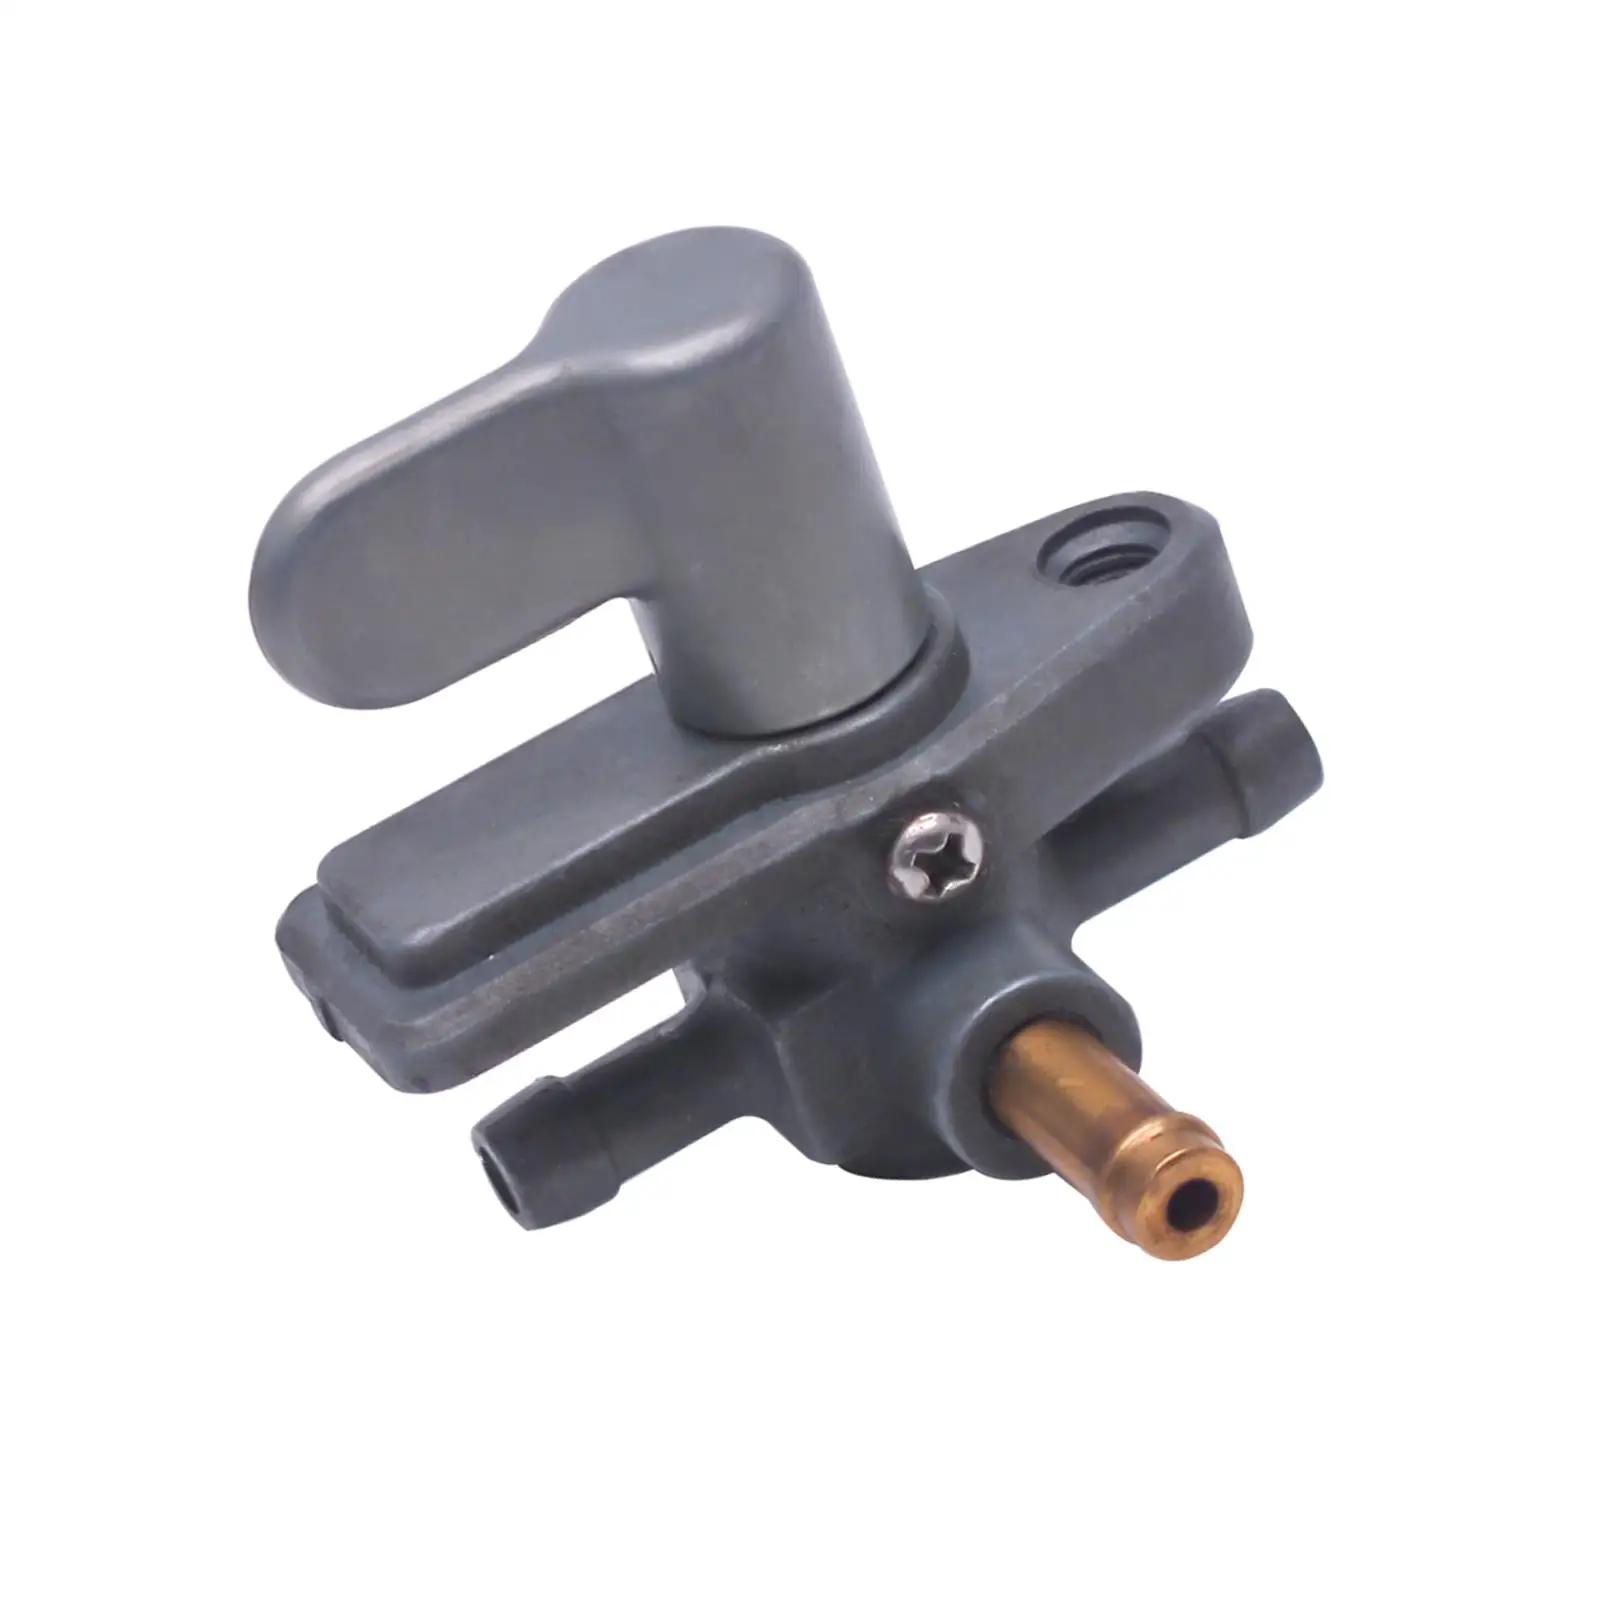 Fuel Cock Assy Switch Replace for Yamaha F4 4HP Outboard Motors Durable Outboard Engines Parts Convenient Installation